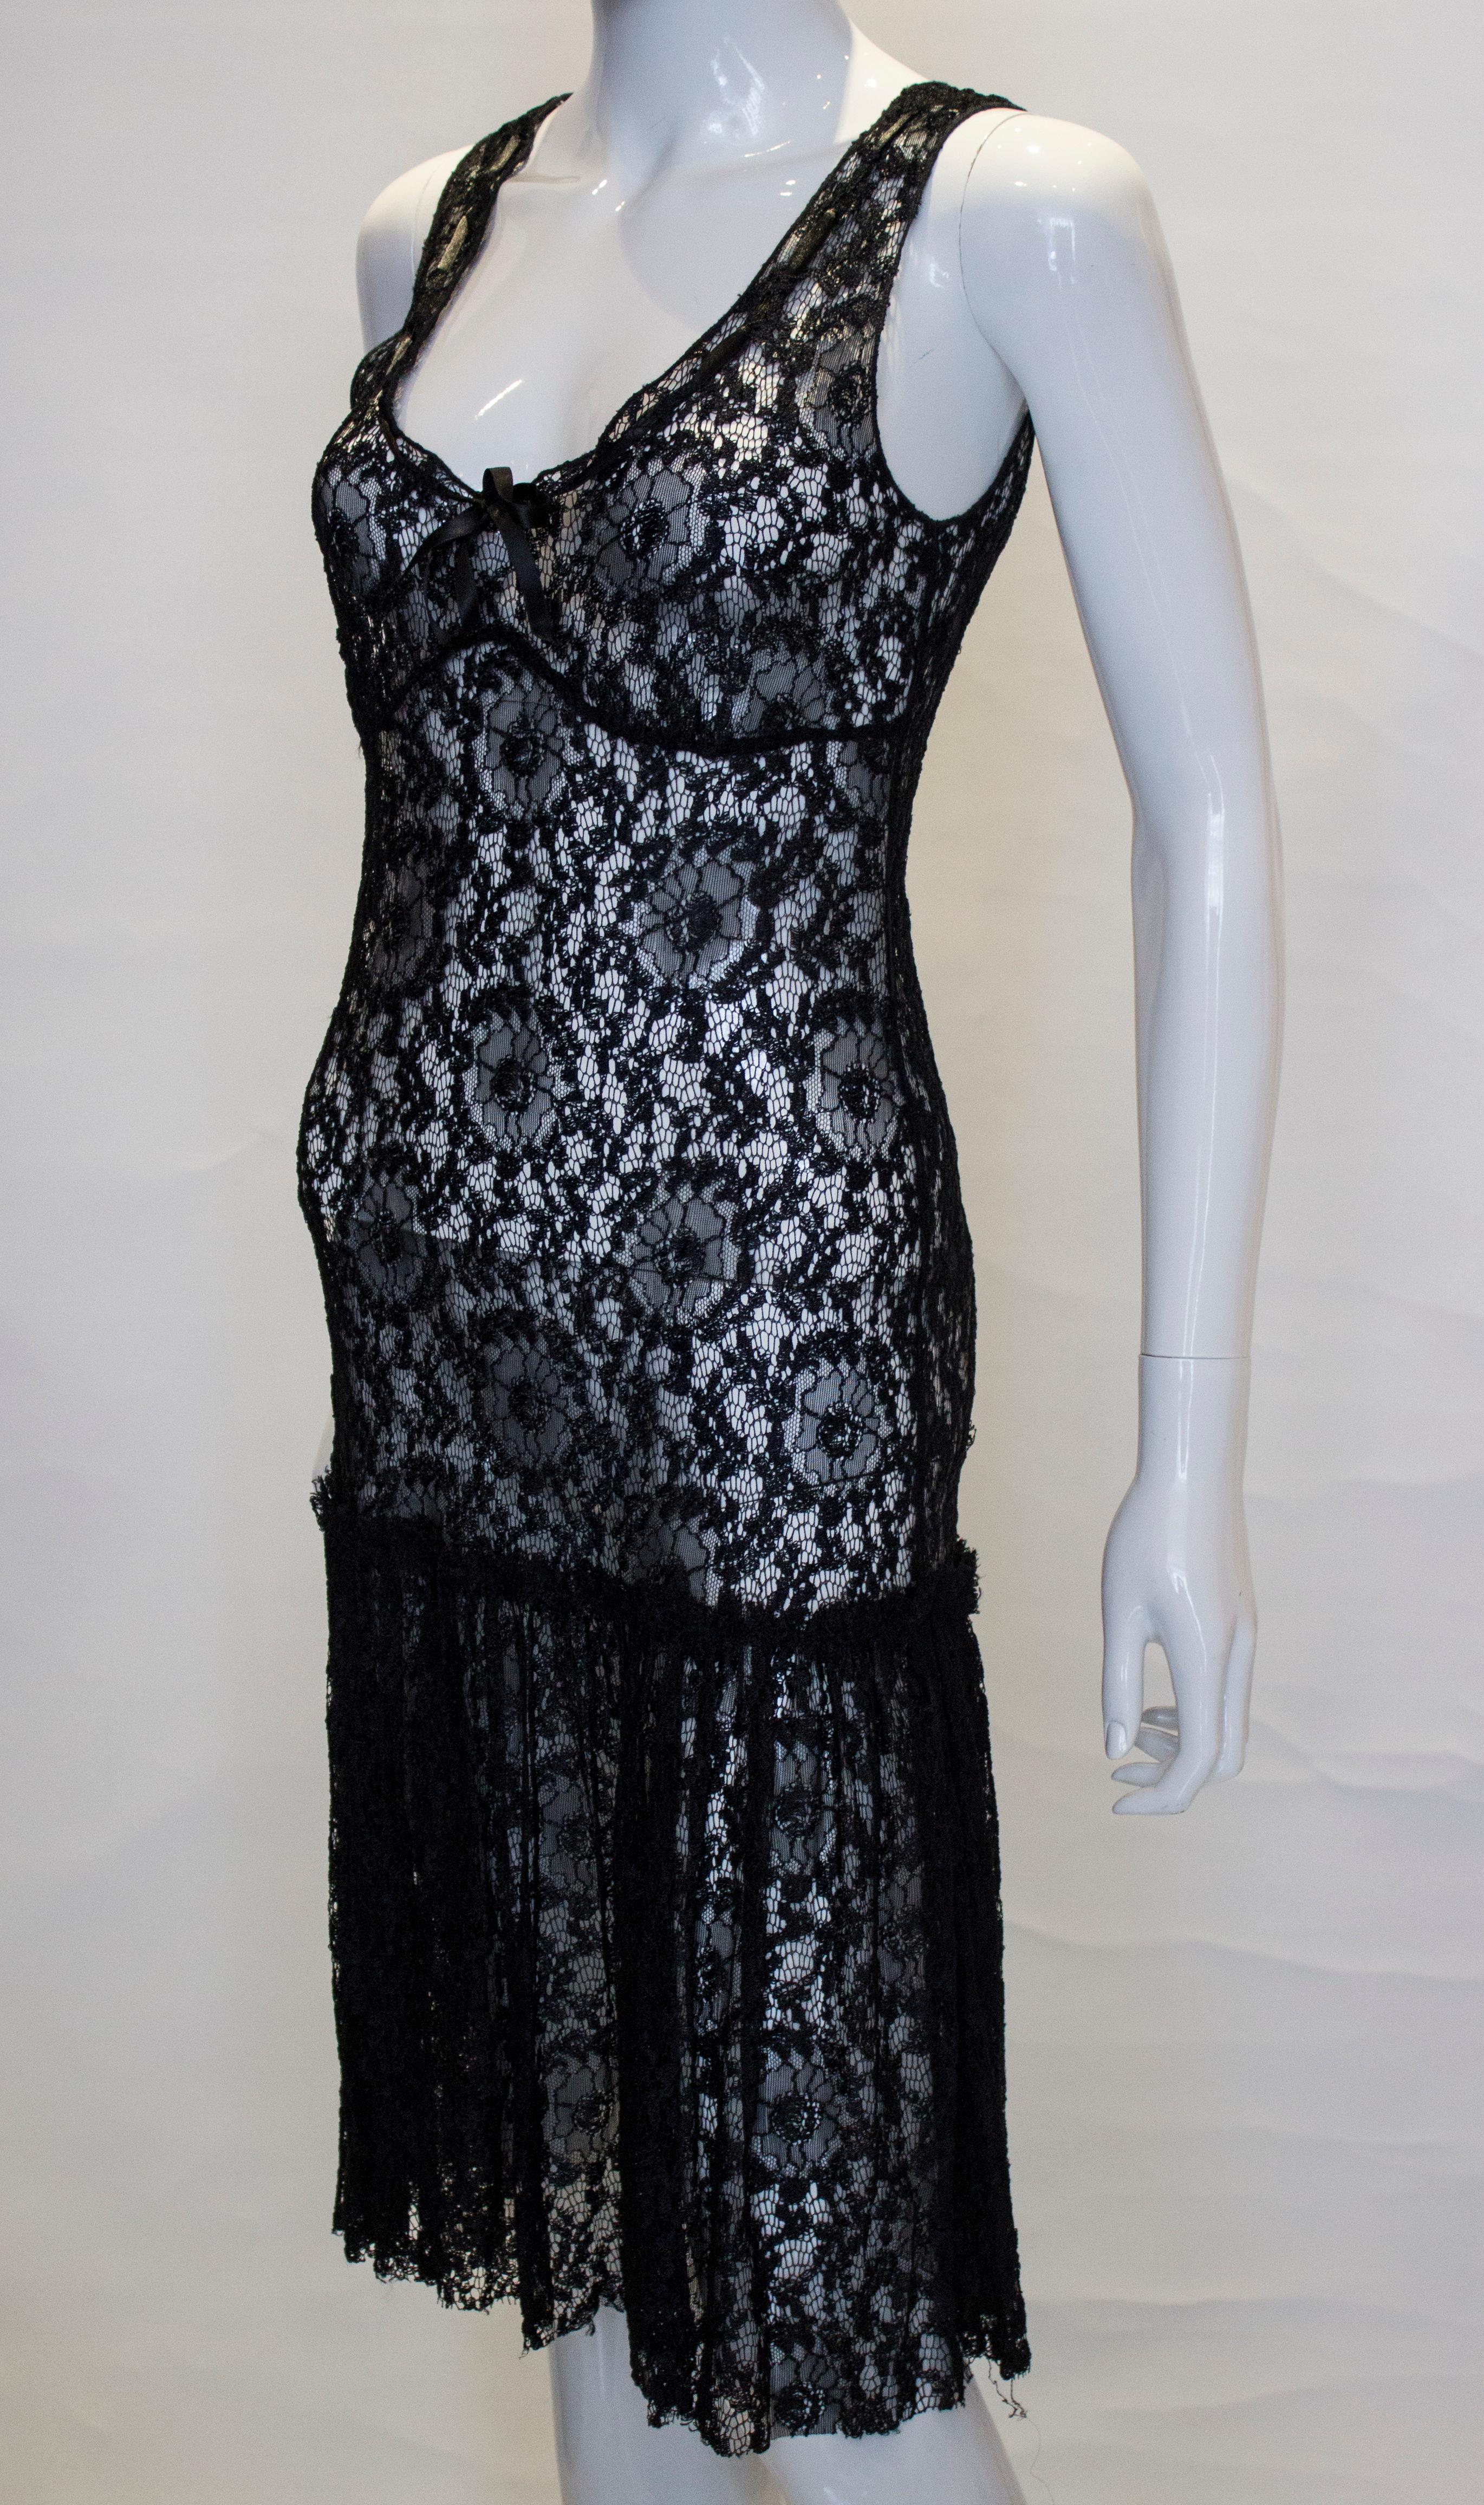 Moschino Cheap n Chic Black Lace Dress In Good Condition For Sale In London, GB